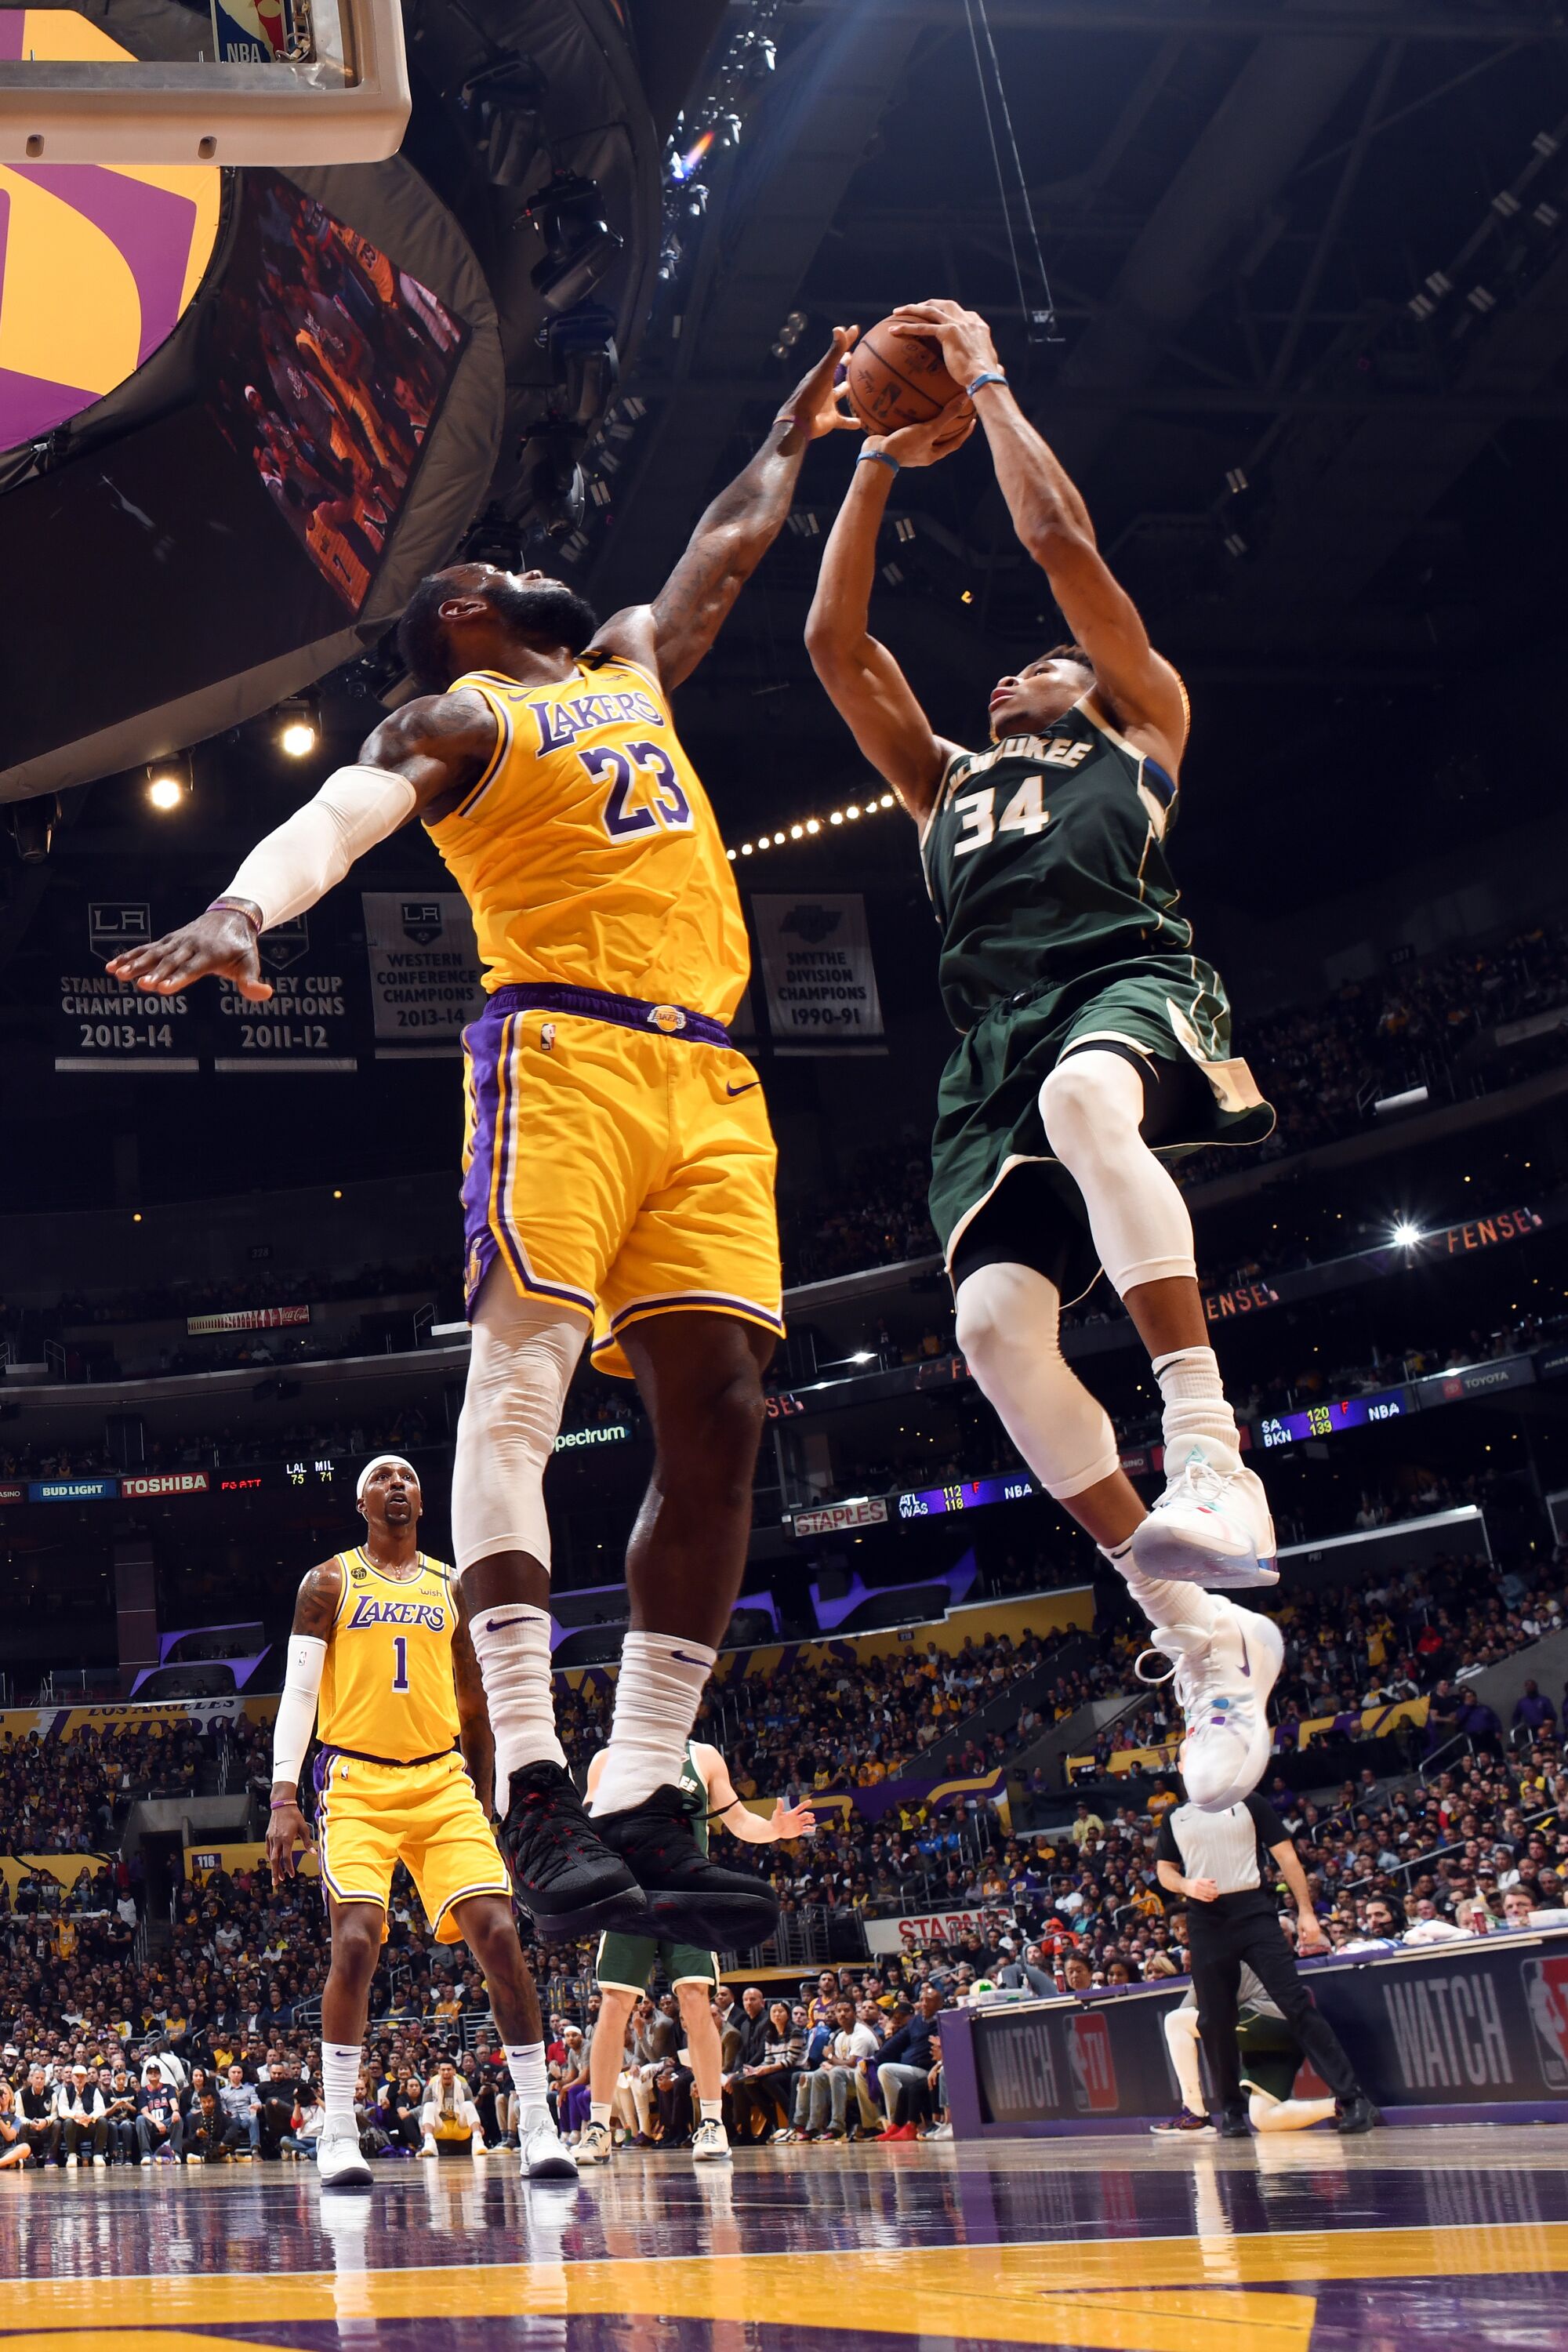 Lakers' LeBron James attempts to block a shot by Milwaukee Bucks' Giannis Antetokounmpo on March 6 at Staples Center.